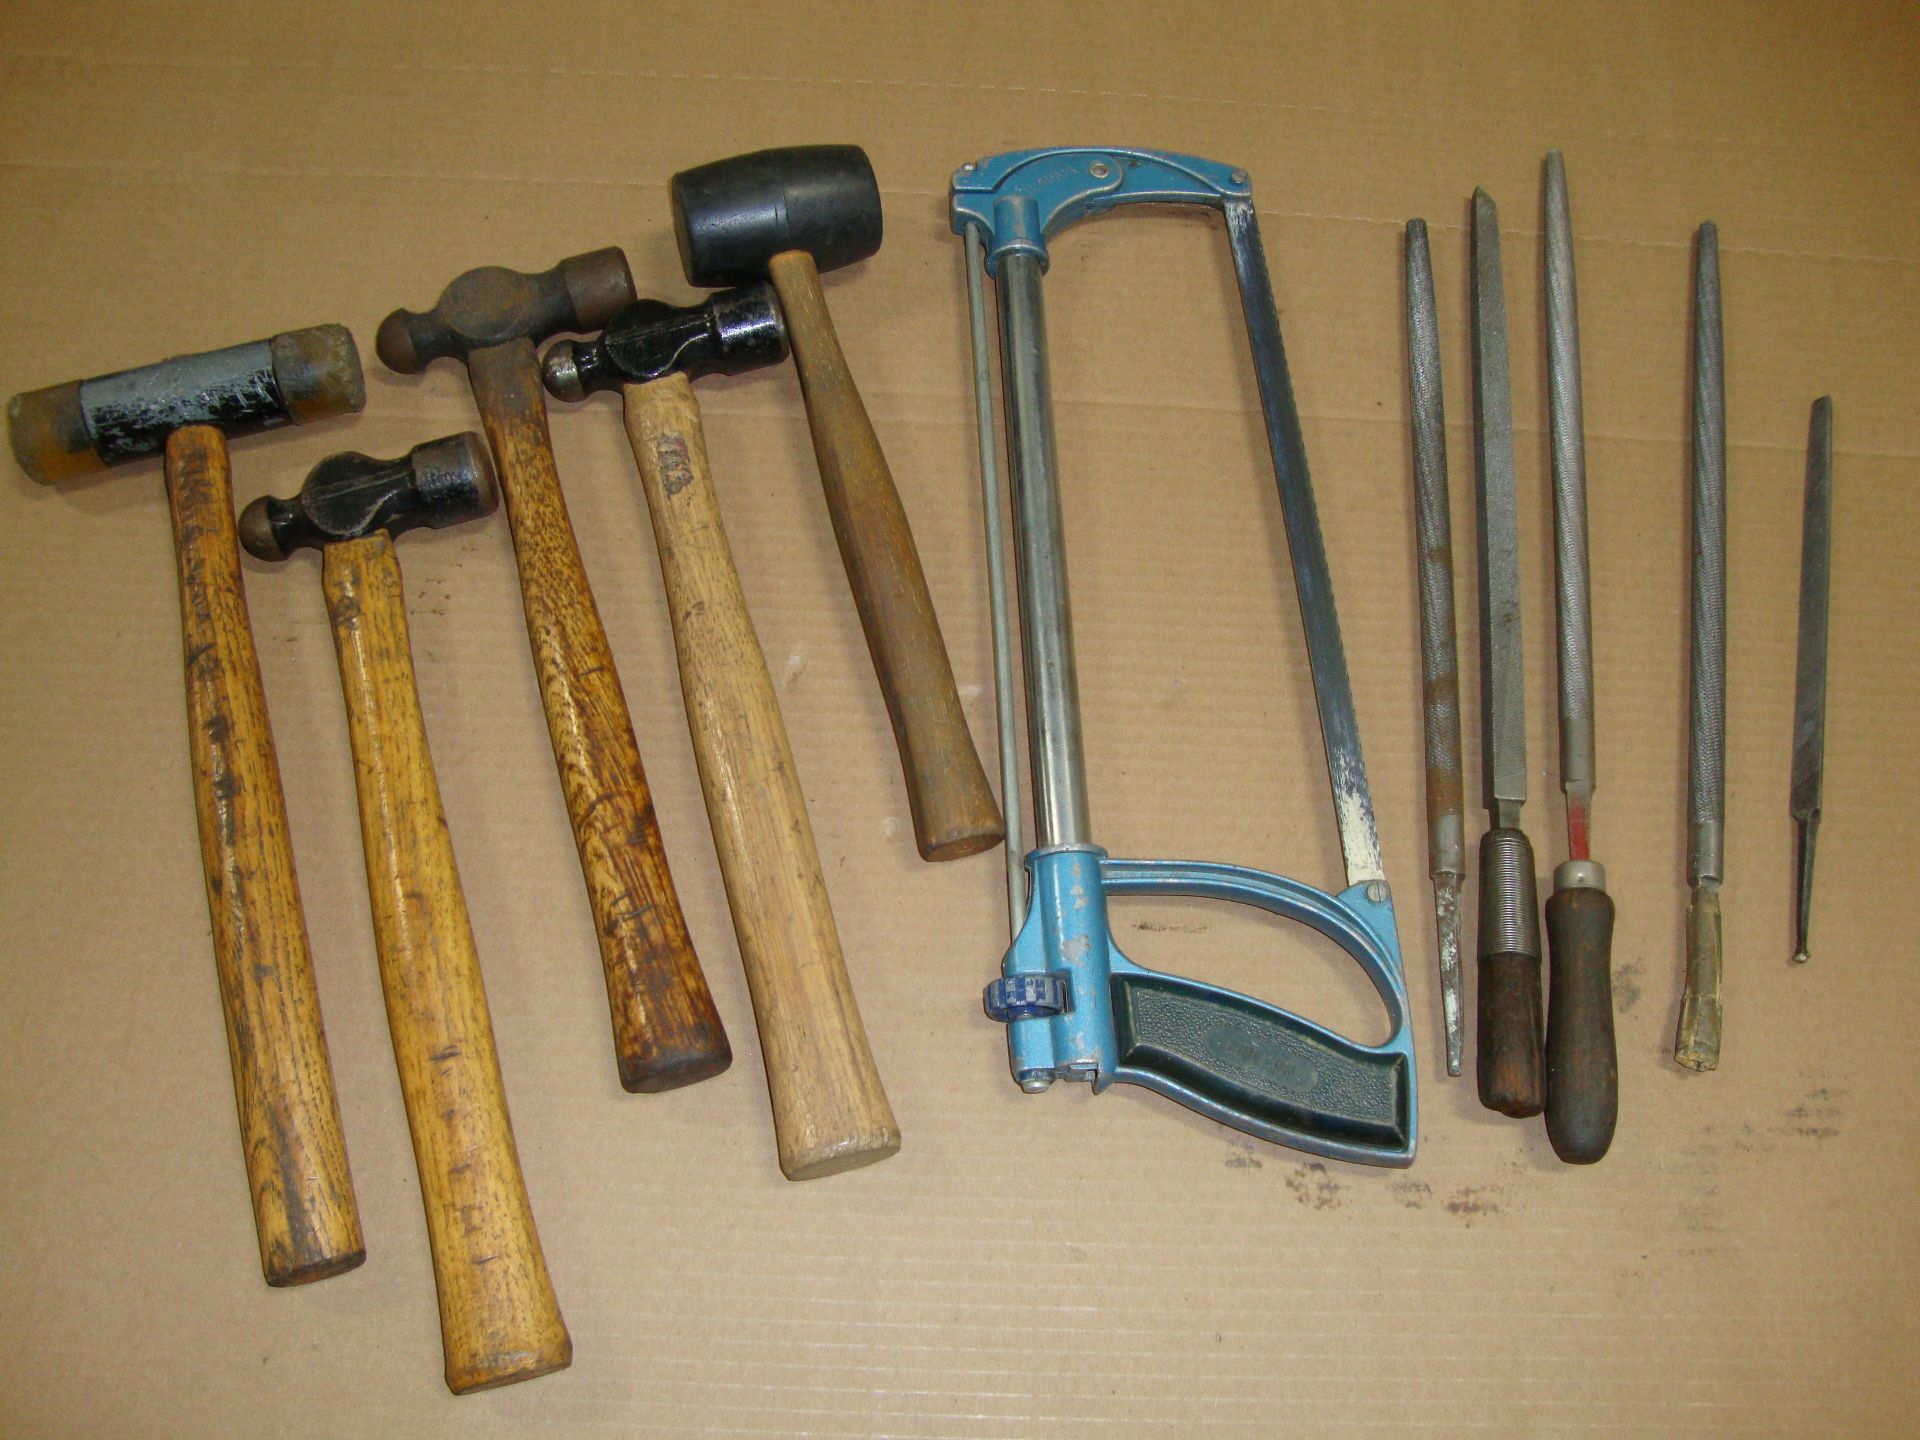 Lot of 5 Assorted Hammers, Hacksaw, and 5 Files